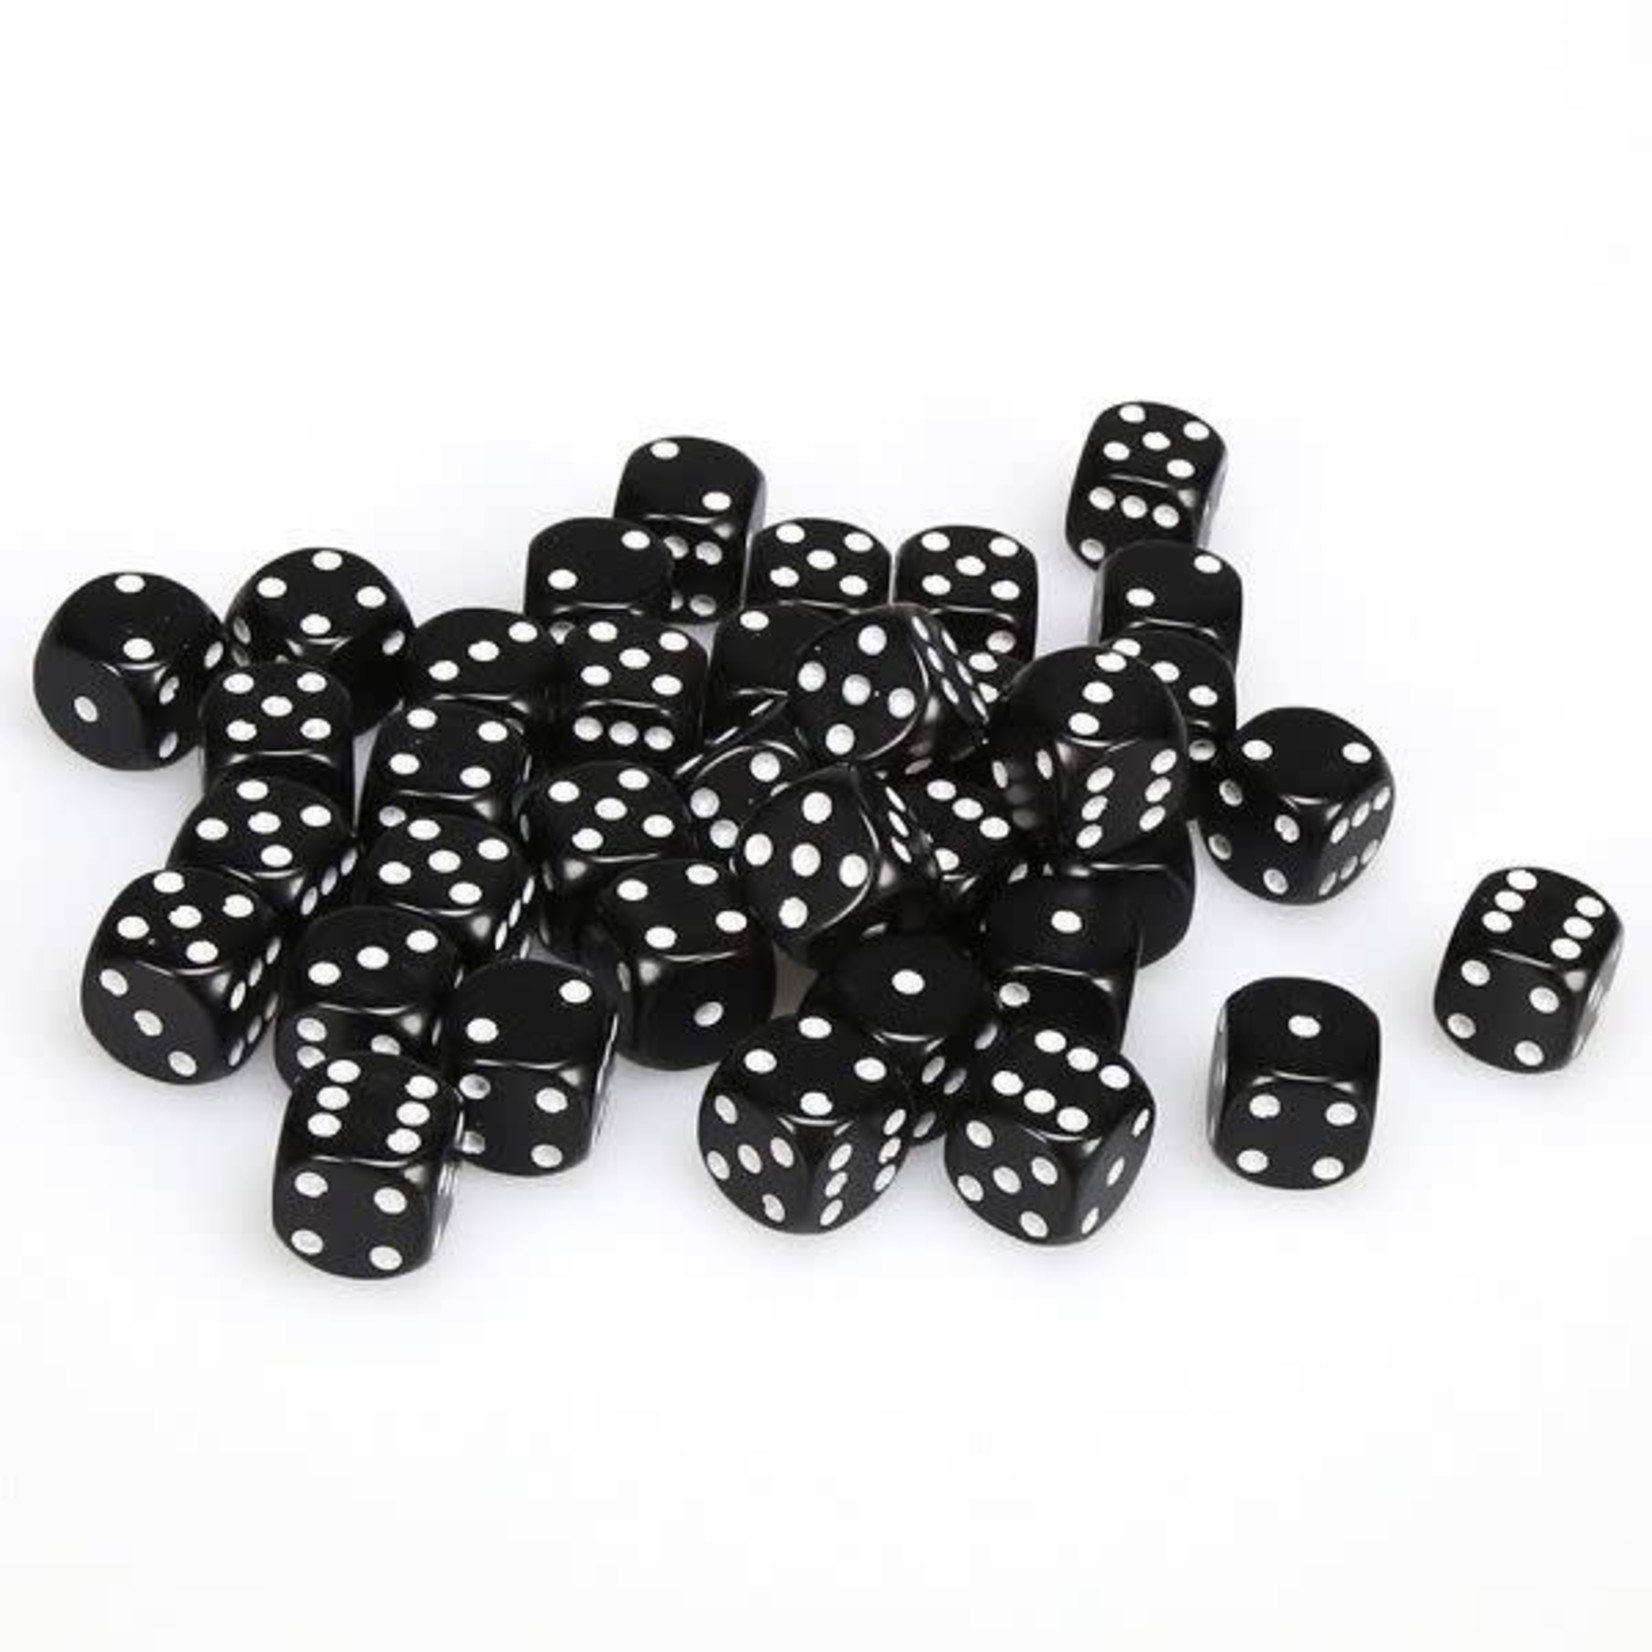 25808 Opaque Black with White 12mm D6-Set